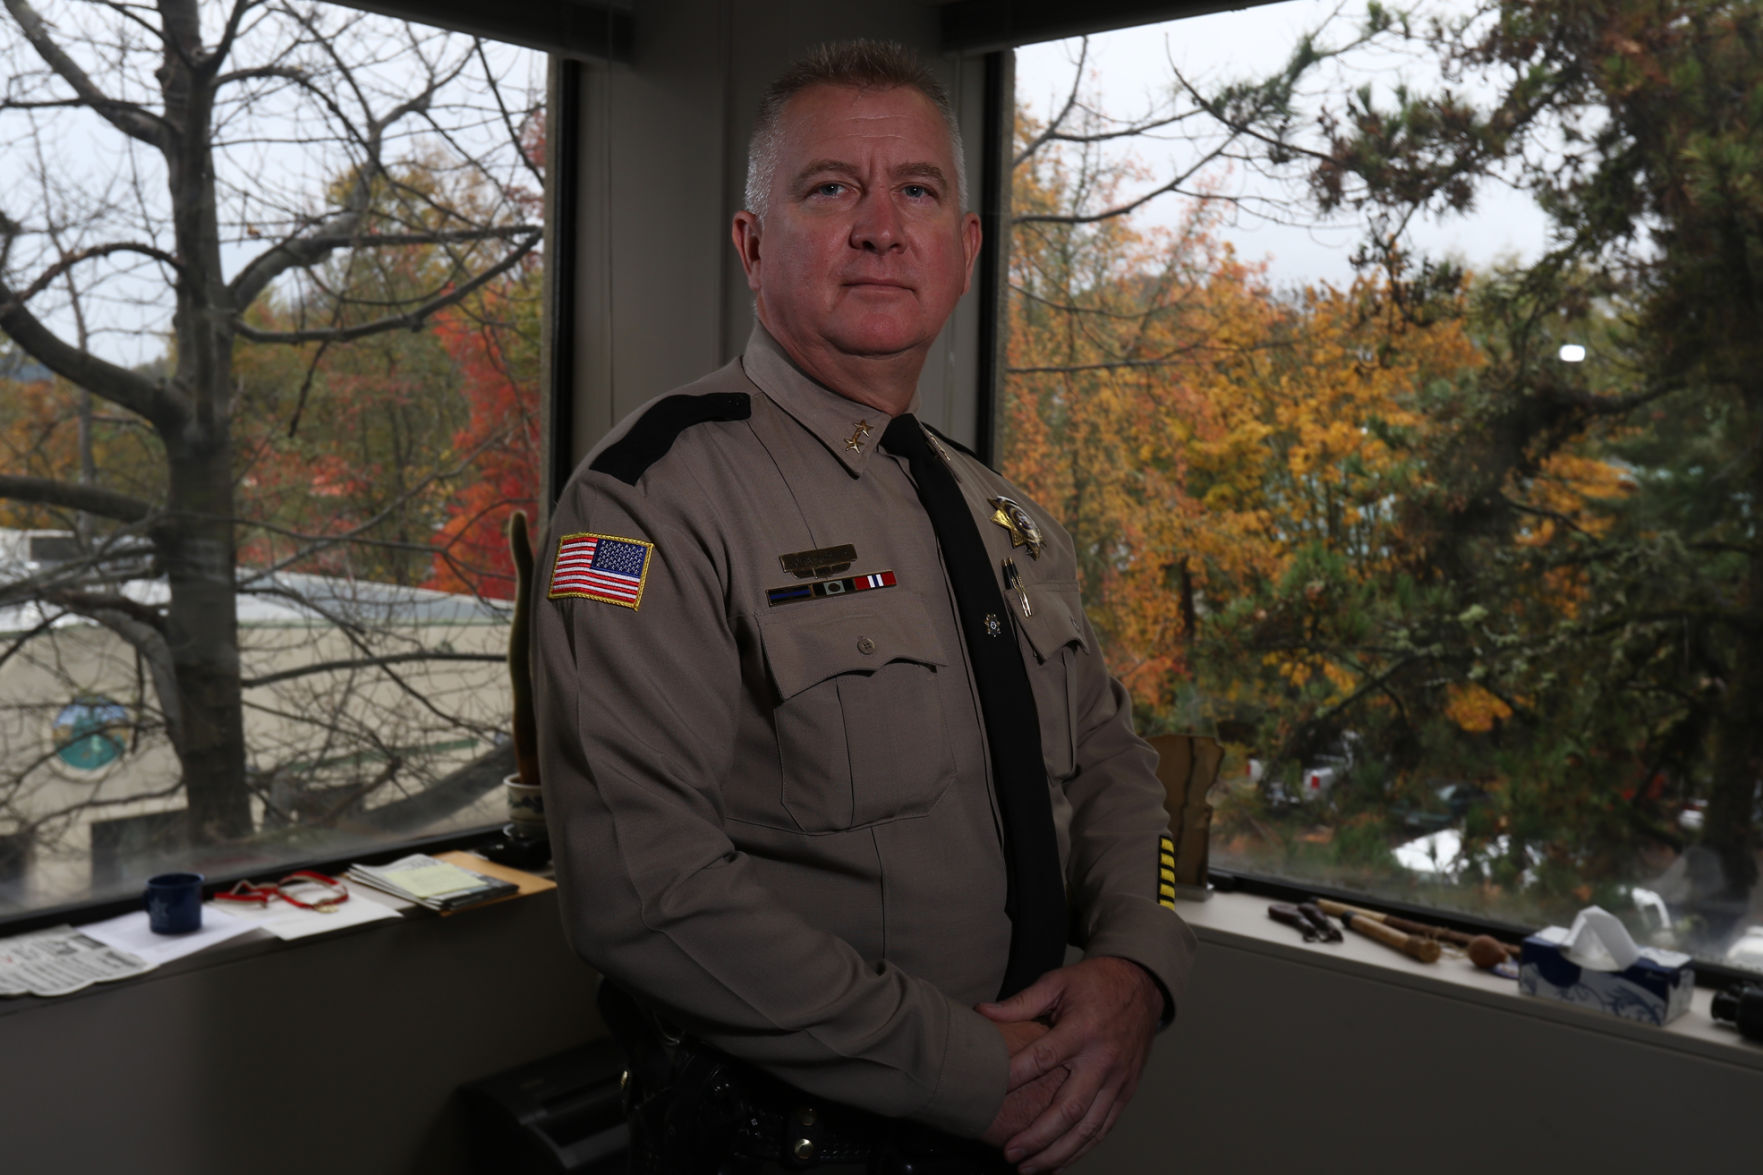 Douglas County Sheriff John Hanlin says nude photo was posted by ex News nrtoday image